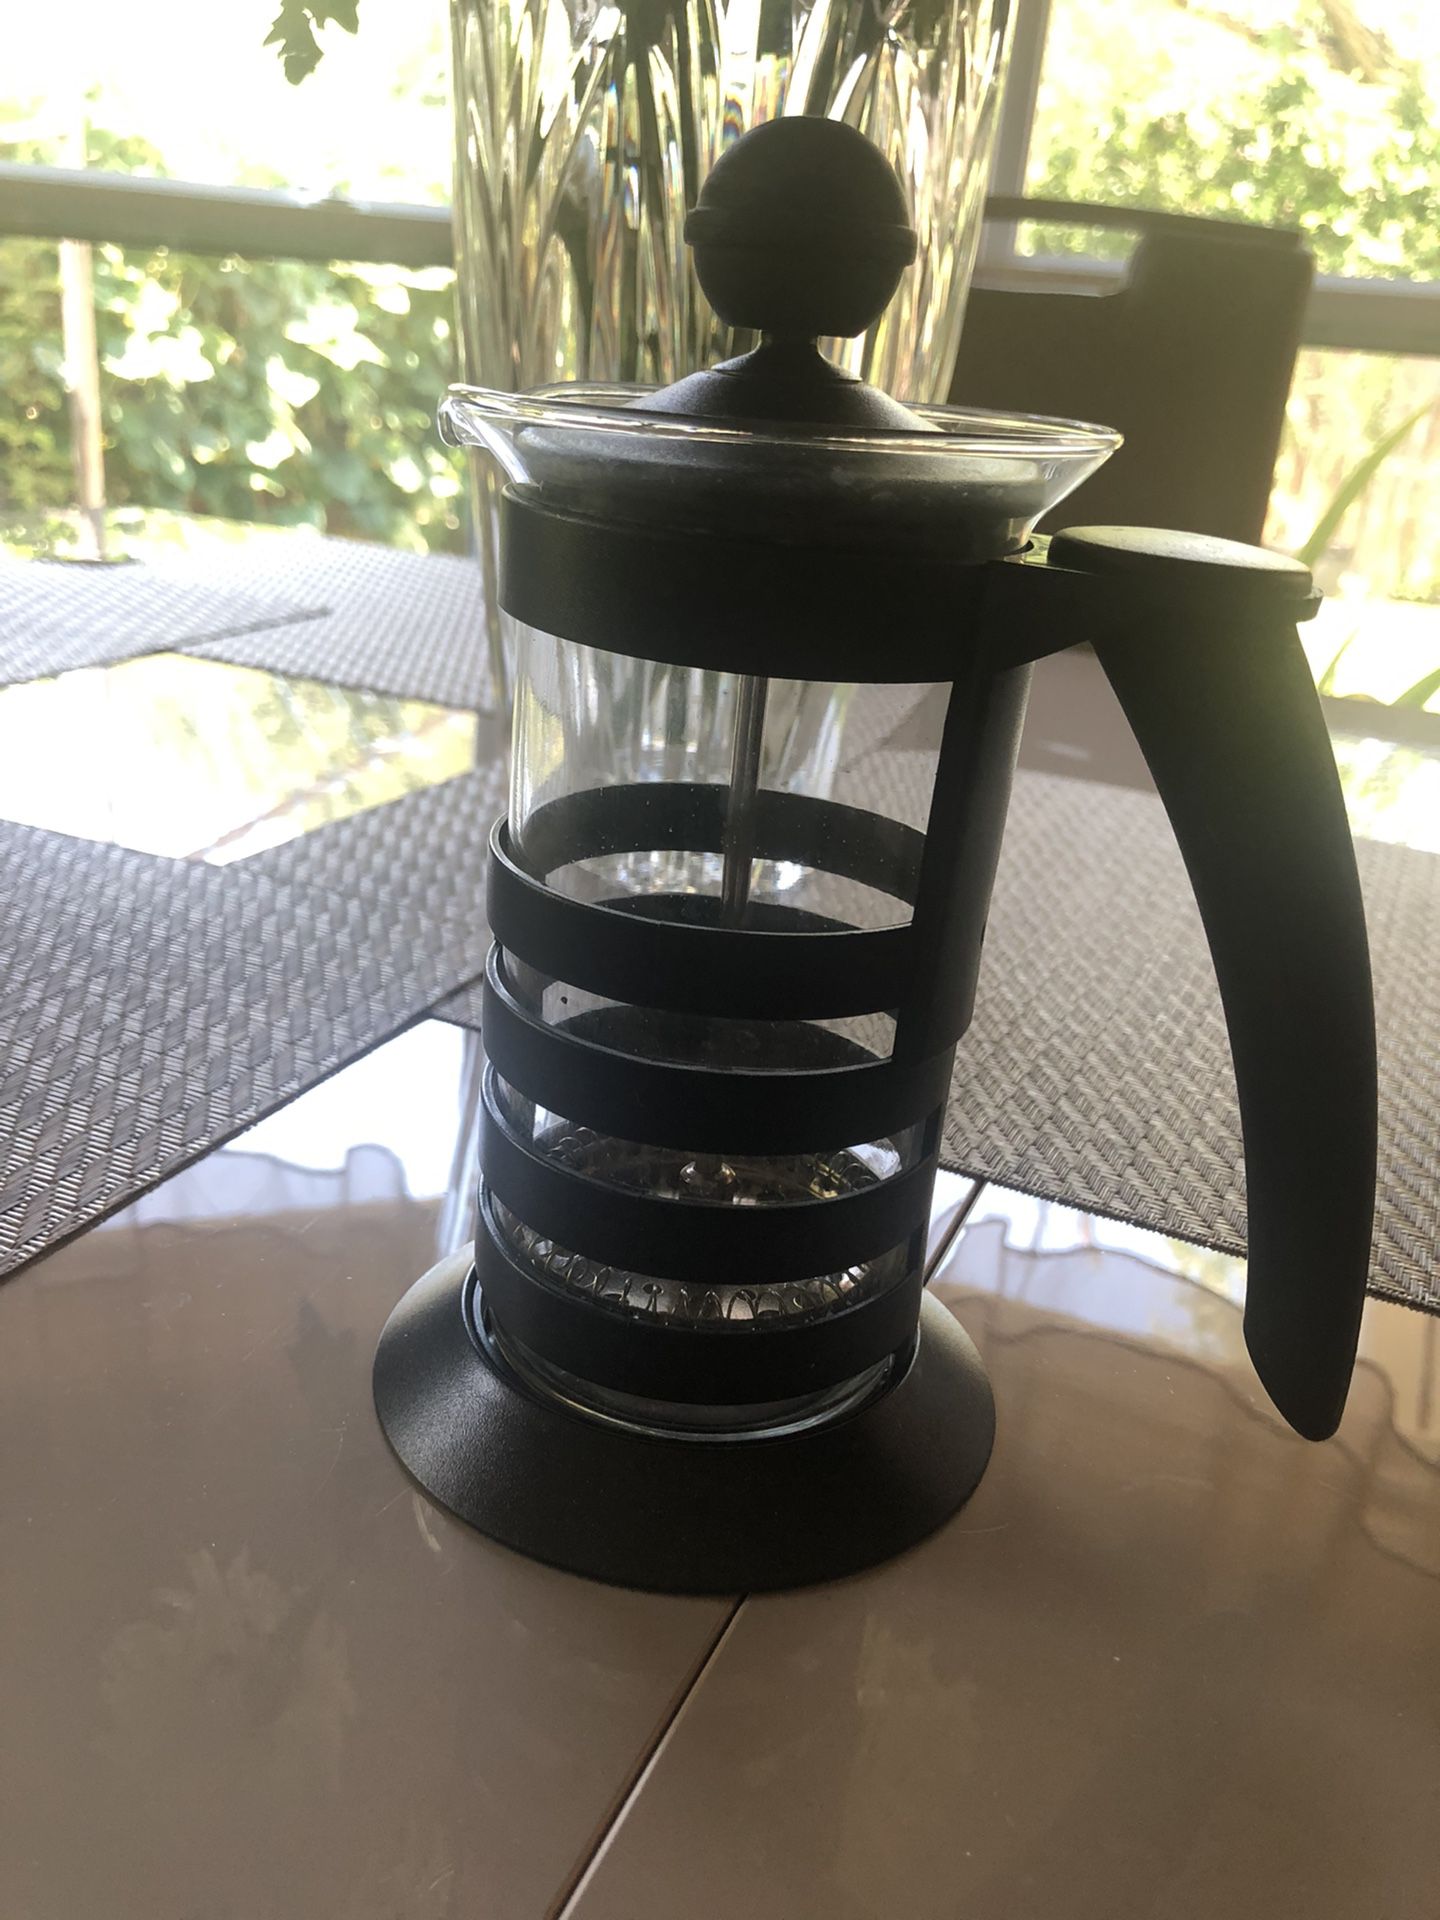 French Press Coffee And Tea Maker